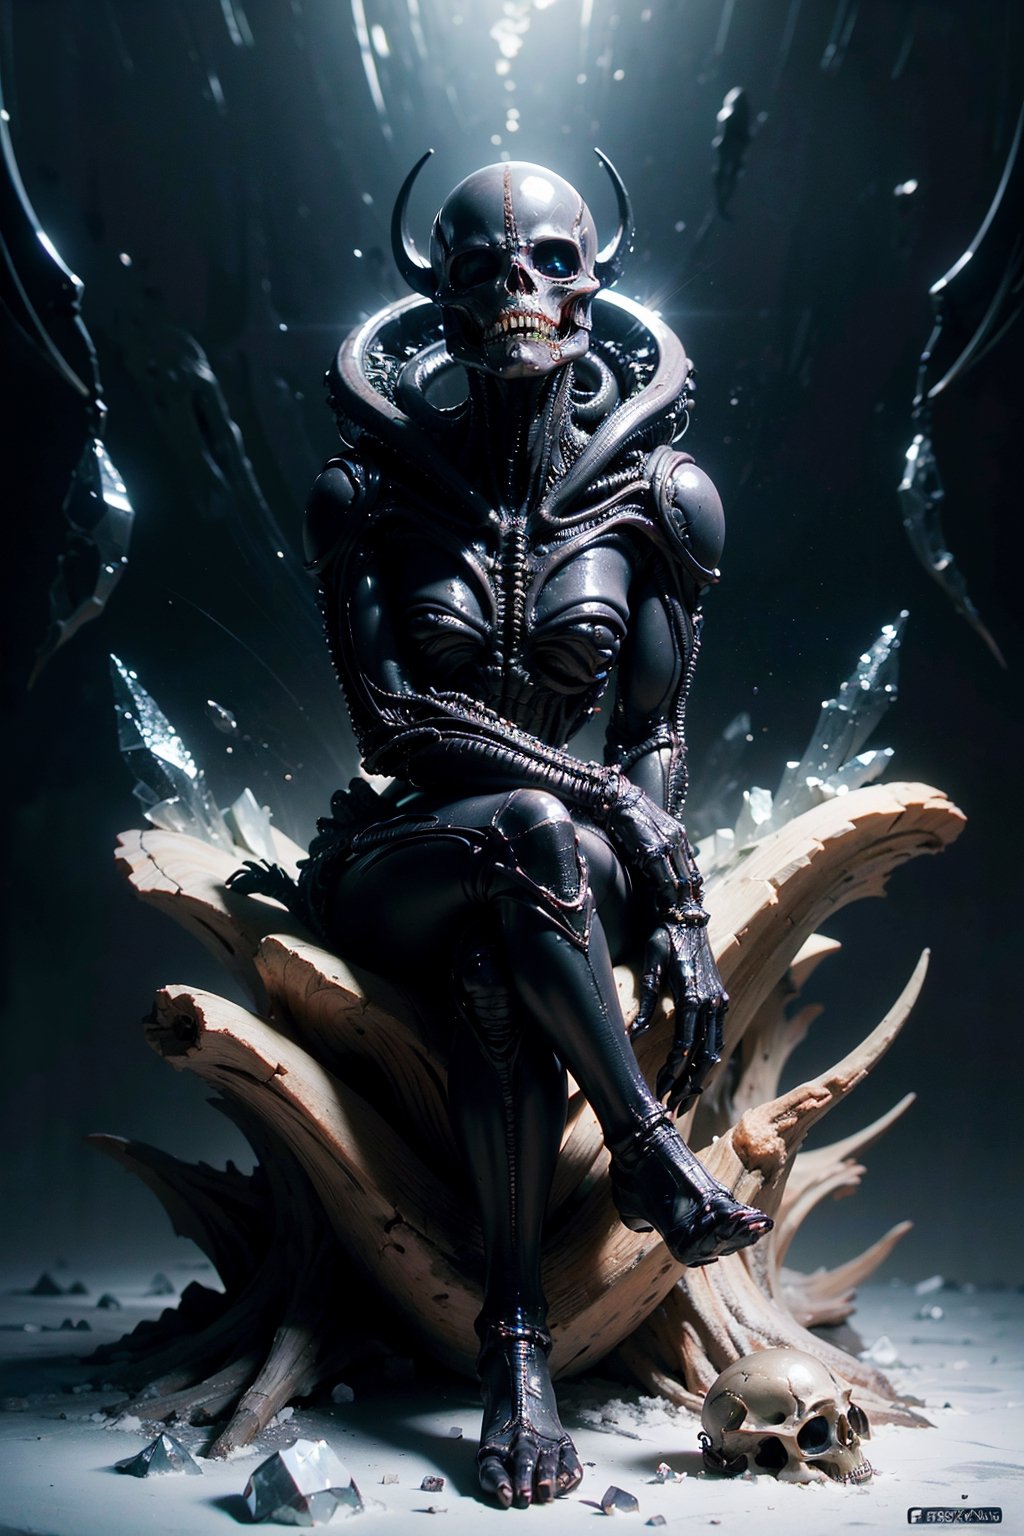 (white space station background), 1 H.R. Giger alien xenomorph, mid shot, full body, (((sitting H.R. Giger black glossy alien xenomorph))), focus on the face, ((rich in details, sitting gracefully on the skull pile, looking at the viewer)), magazine cover, (rich in details), masterpiece, horror, (crystal skull decoration, crystal skull pattern), (horrible atmosphere), Tindal effect, (Balance and coordination between all things), ((scary, cruel, evil, mist)), (screaming alien xenomorph), (delicate crystal bone), absurdity, dust particles, white dust particle effects, crystal clear texture, space stars, High detailed, masterpiece